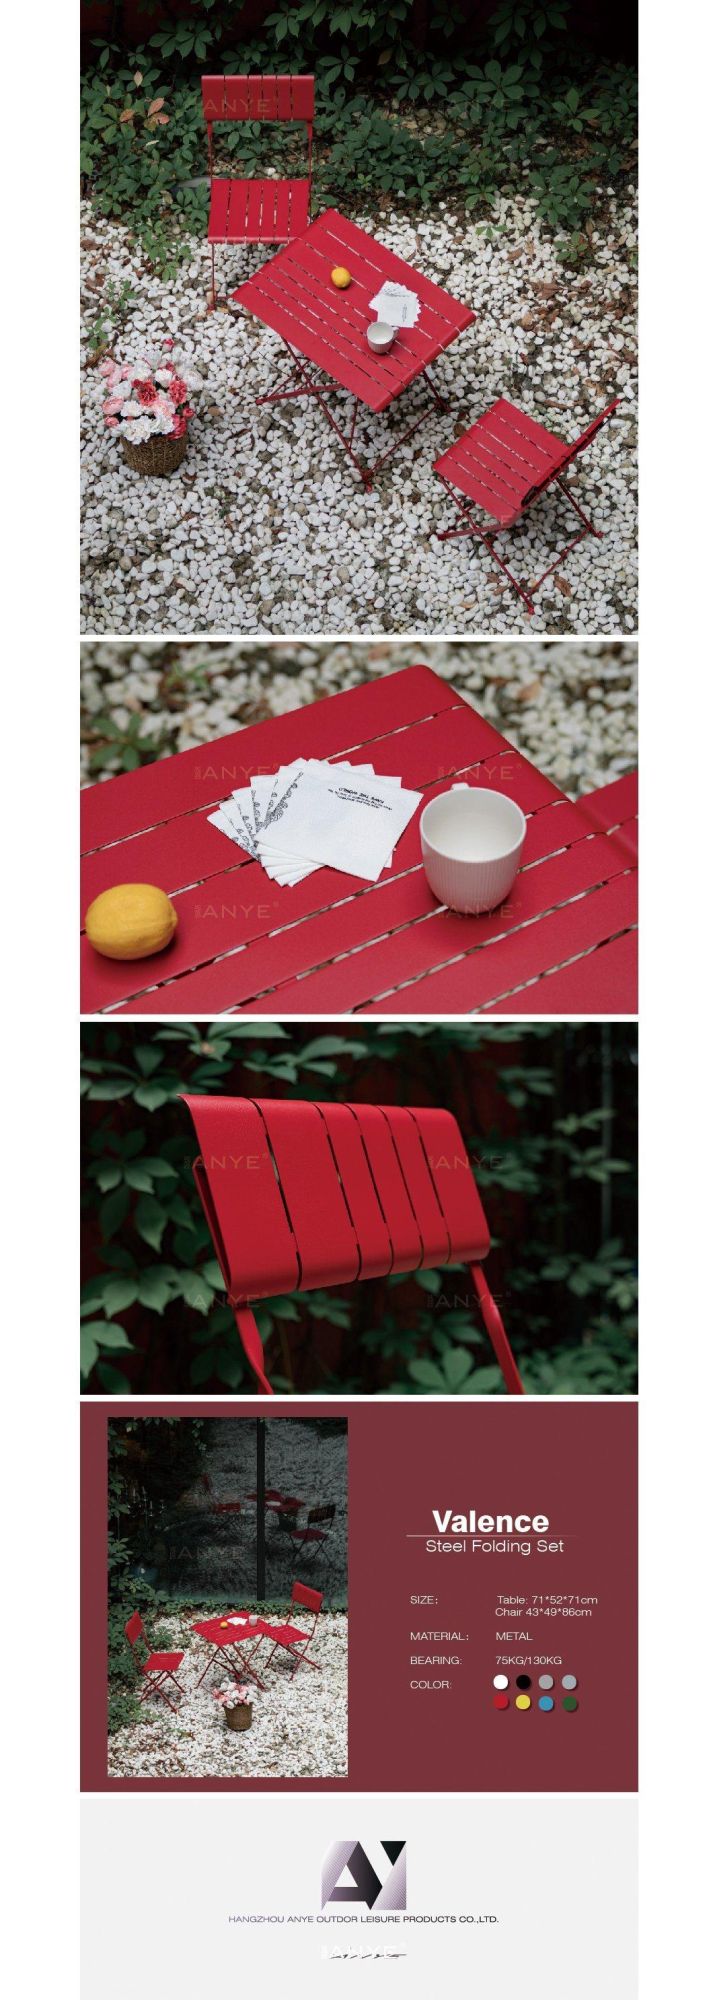 Backyard Furniture Set Rust Resistant Outdoor Foldable Coffee Table and Chair with Modern Design